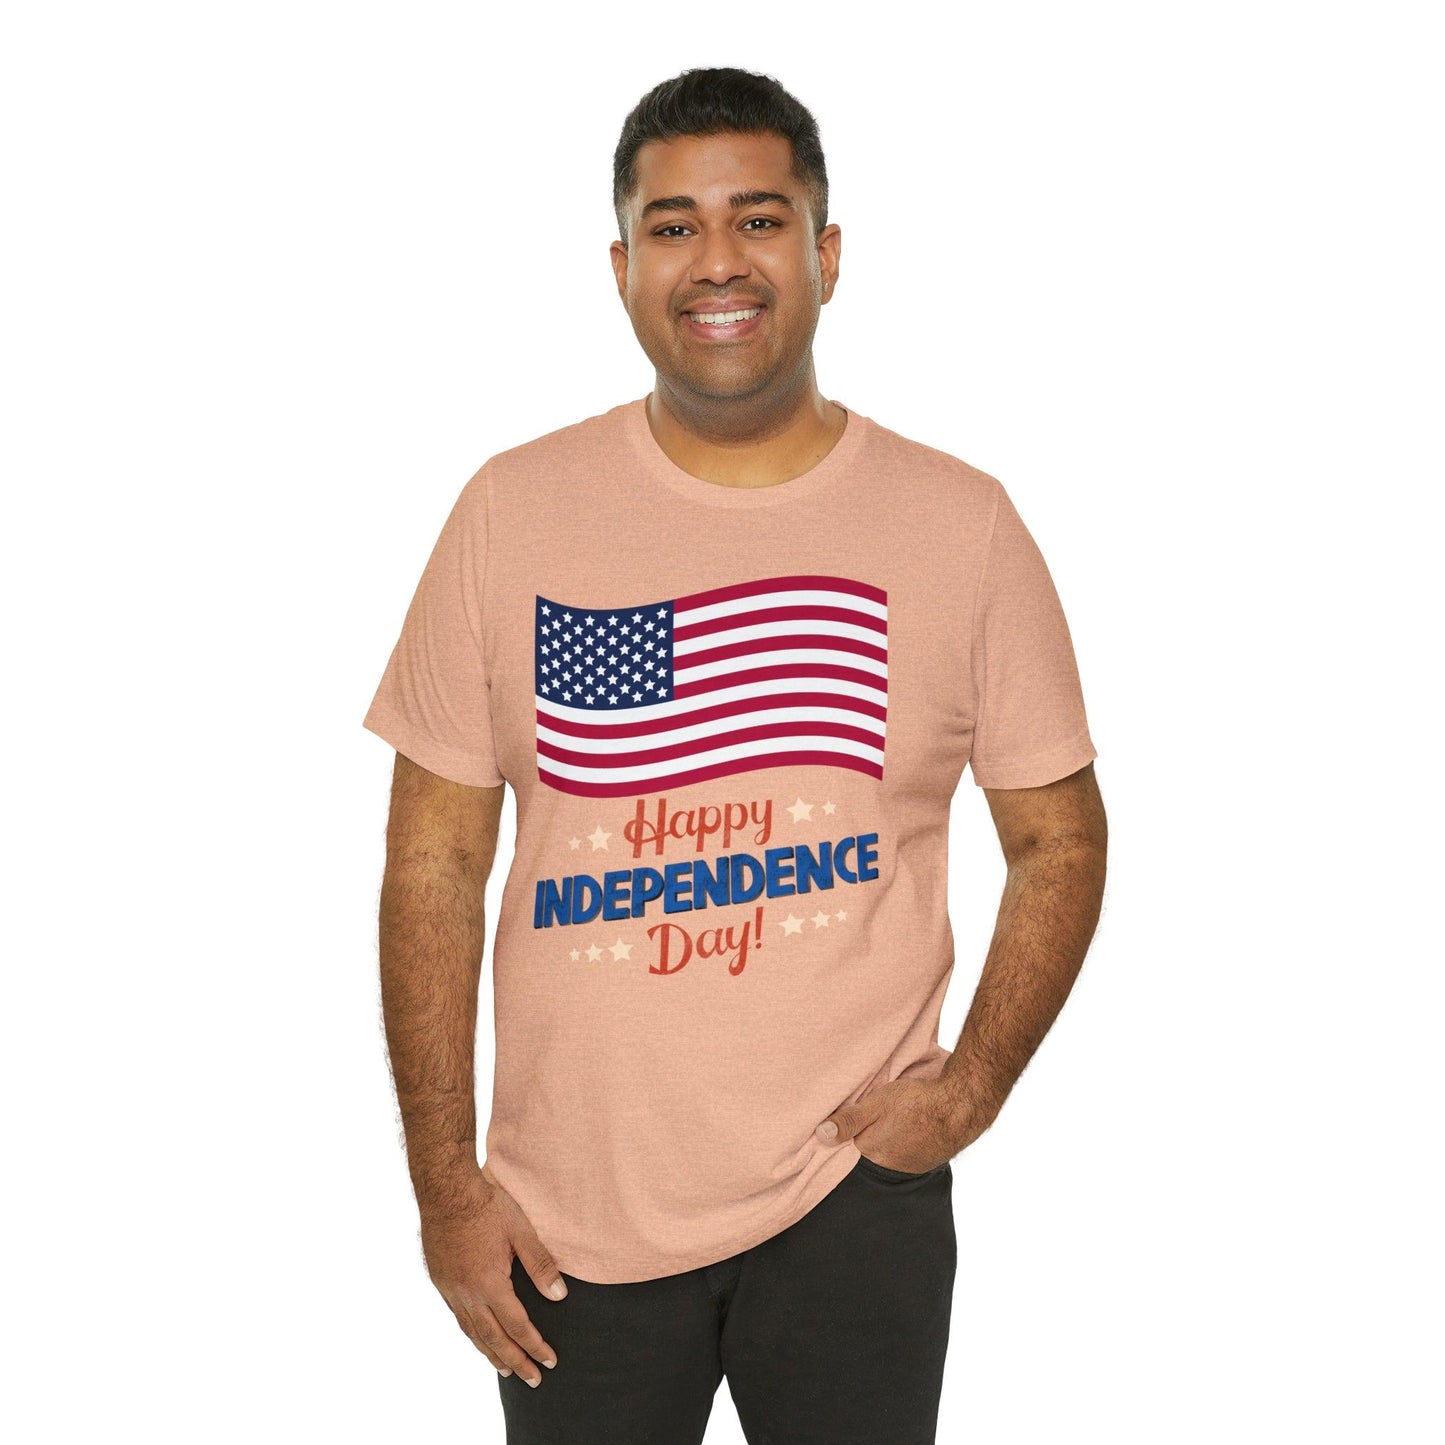 Independence Day shirt, American flag shirt, Red, white, and blue shirt, 4th of July clothing